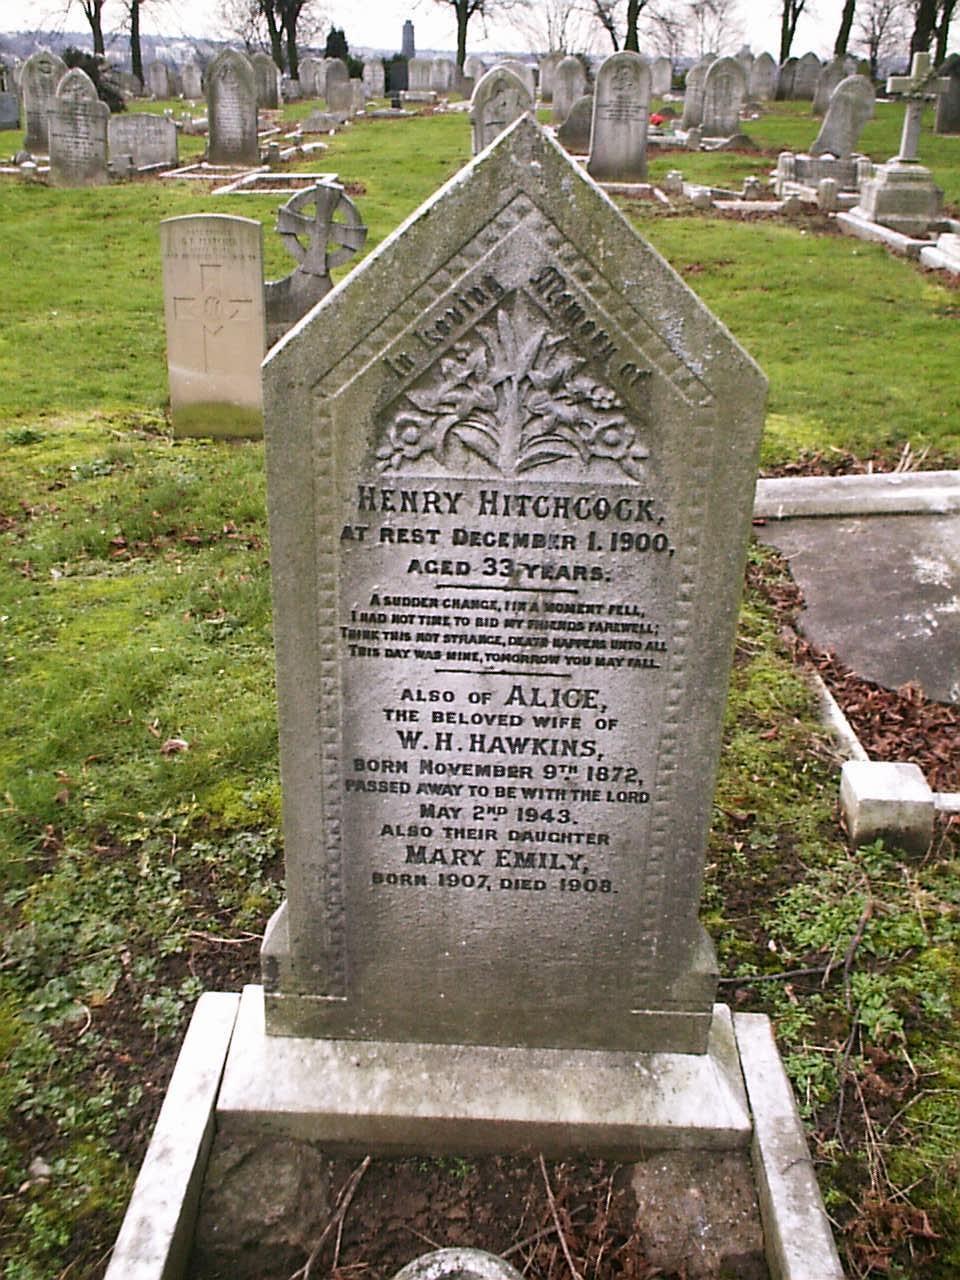 Henry Hitchcock's headstone in Nottingham Road Cemetary, Derby.